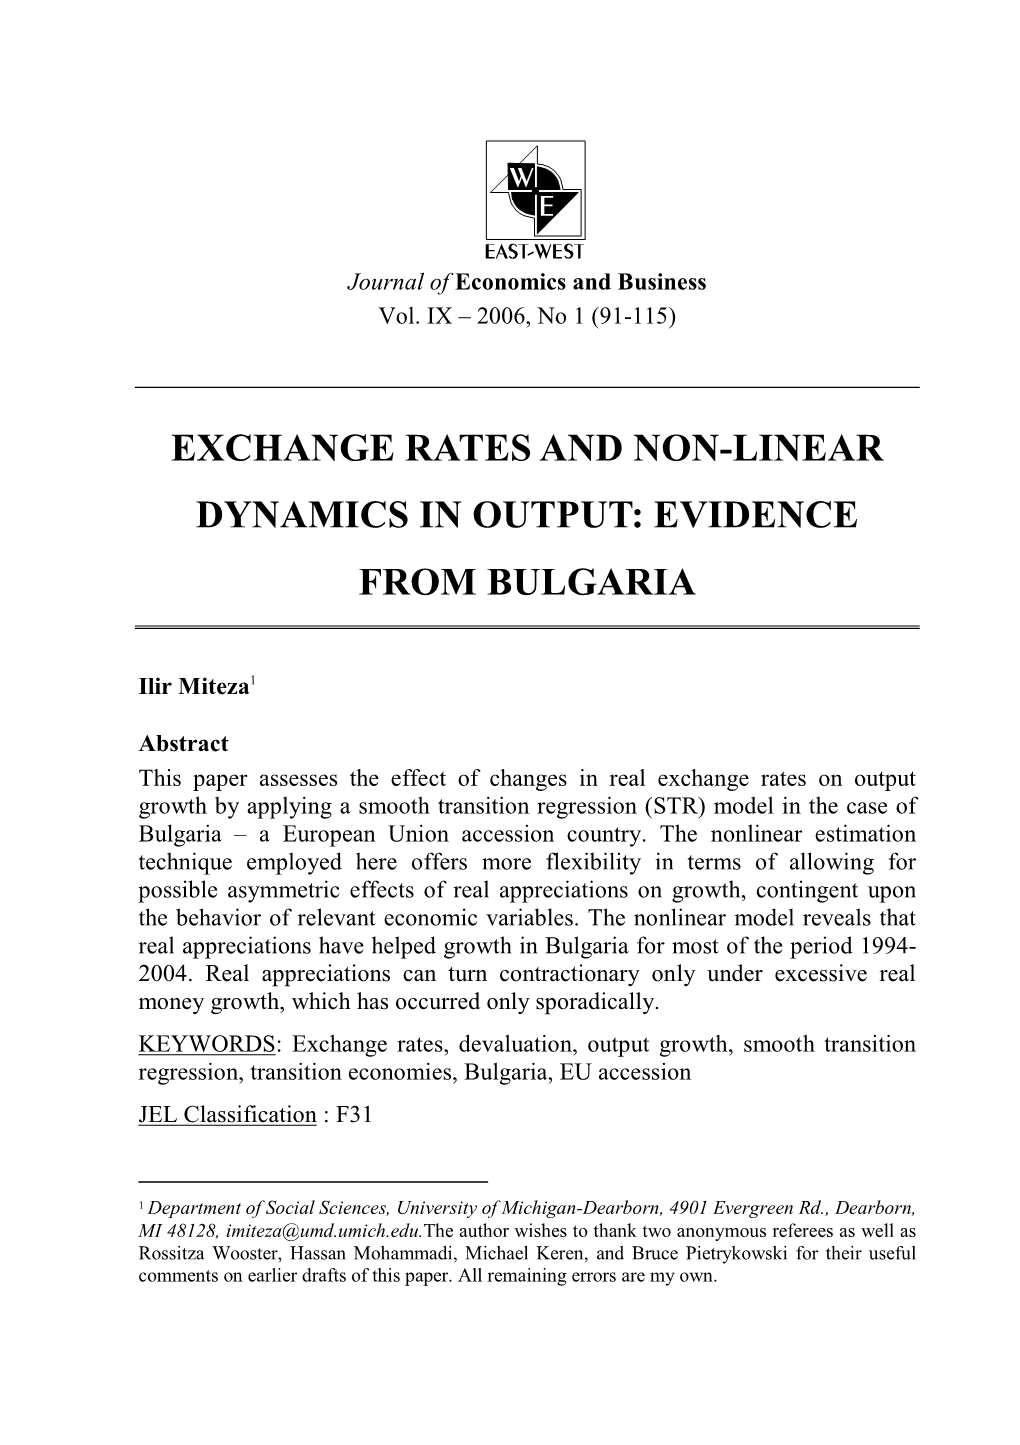 Exchange Rates and Non-Linear Dynamics in Output: Evidence from Bulgaria